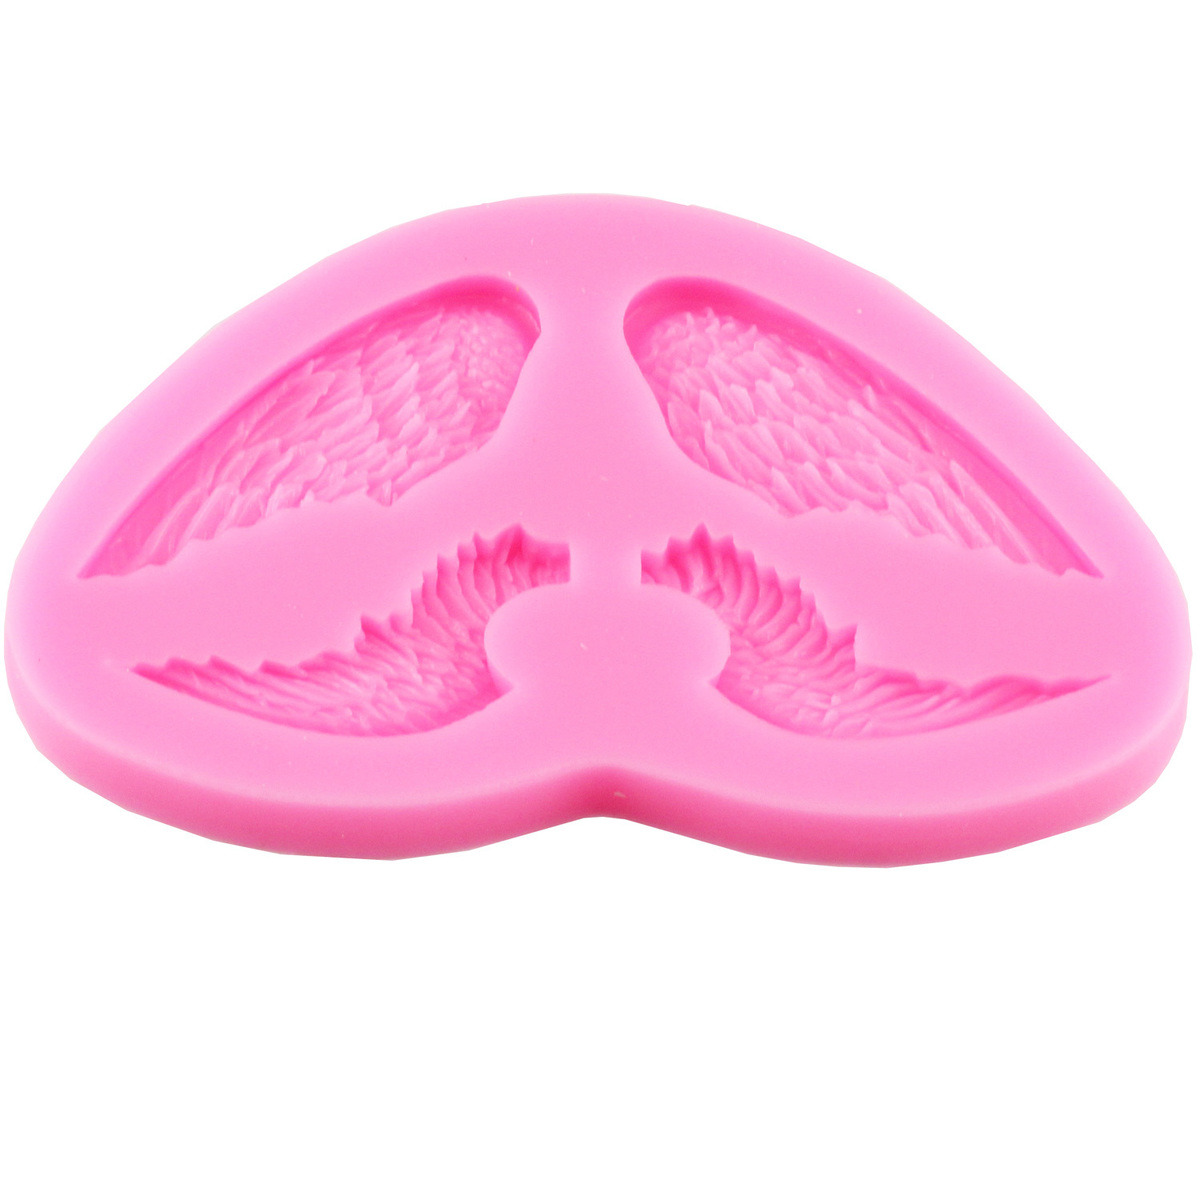 Angel Wings Set Silicone Mold Sugarcraft Fondant Chocolate Candy Gumpaste Mold Cupcake Topper Cookie Baking Cake Decorating Tool